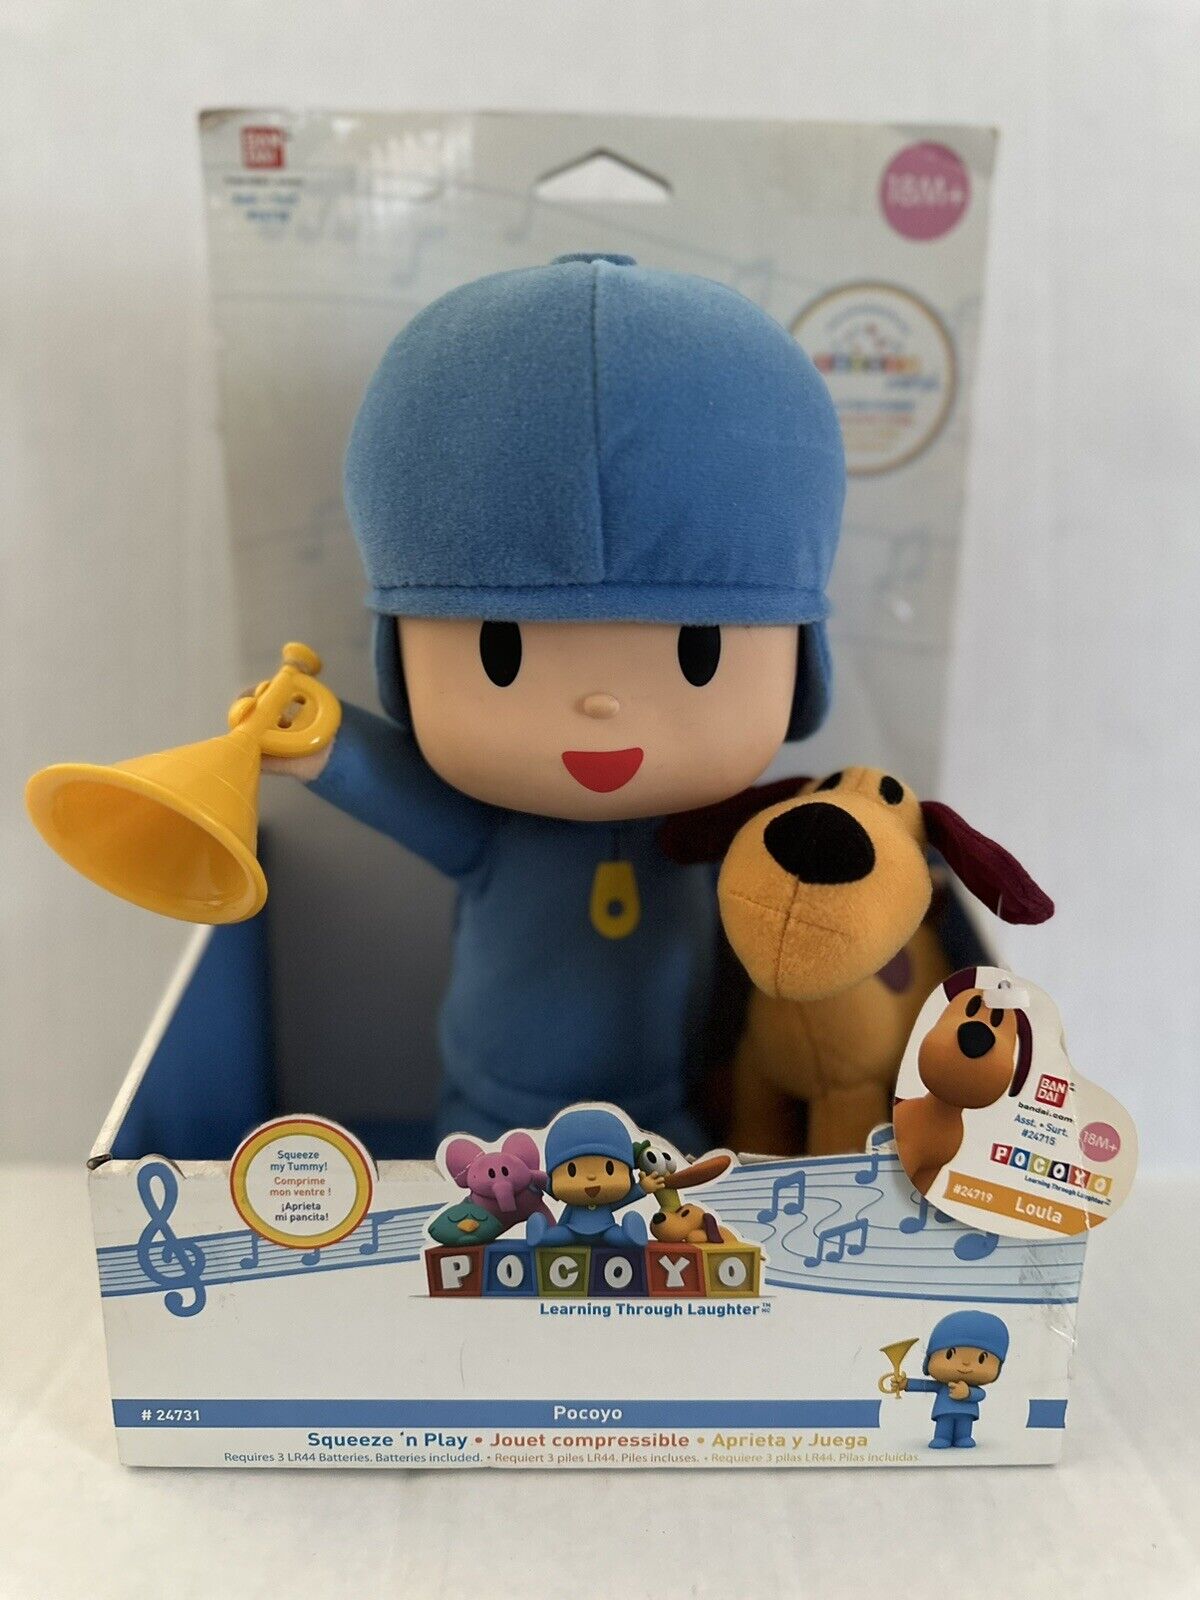 Vintage/Hard To Find/Authentic Bandai Pocoyo And Loula Plush -New in Packing